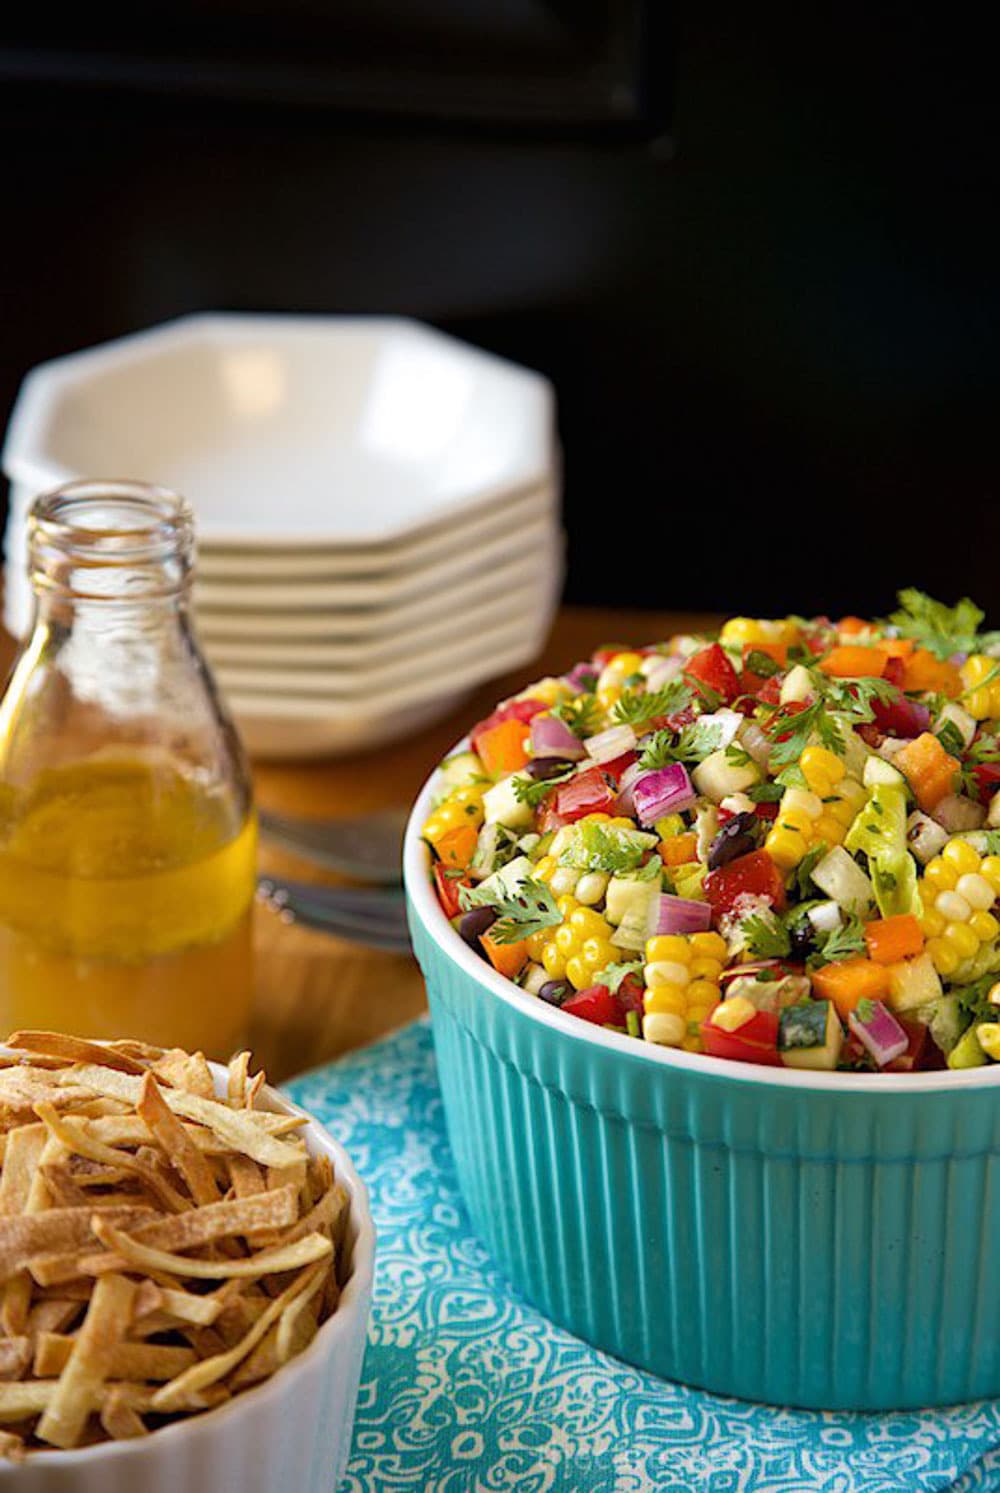 Image of Mexican Chopped Salad with serving bowls and dressing.